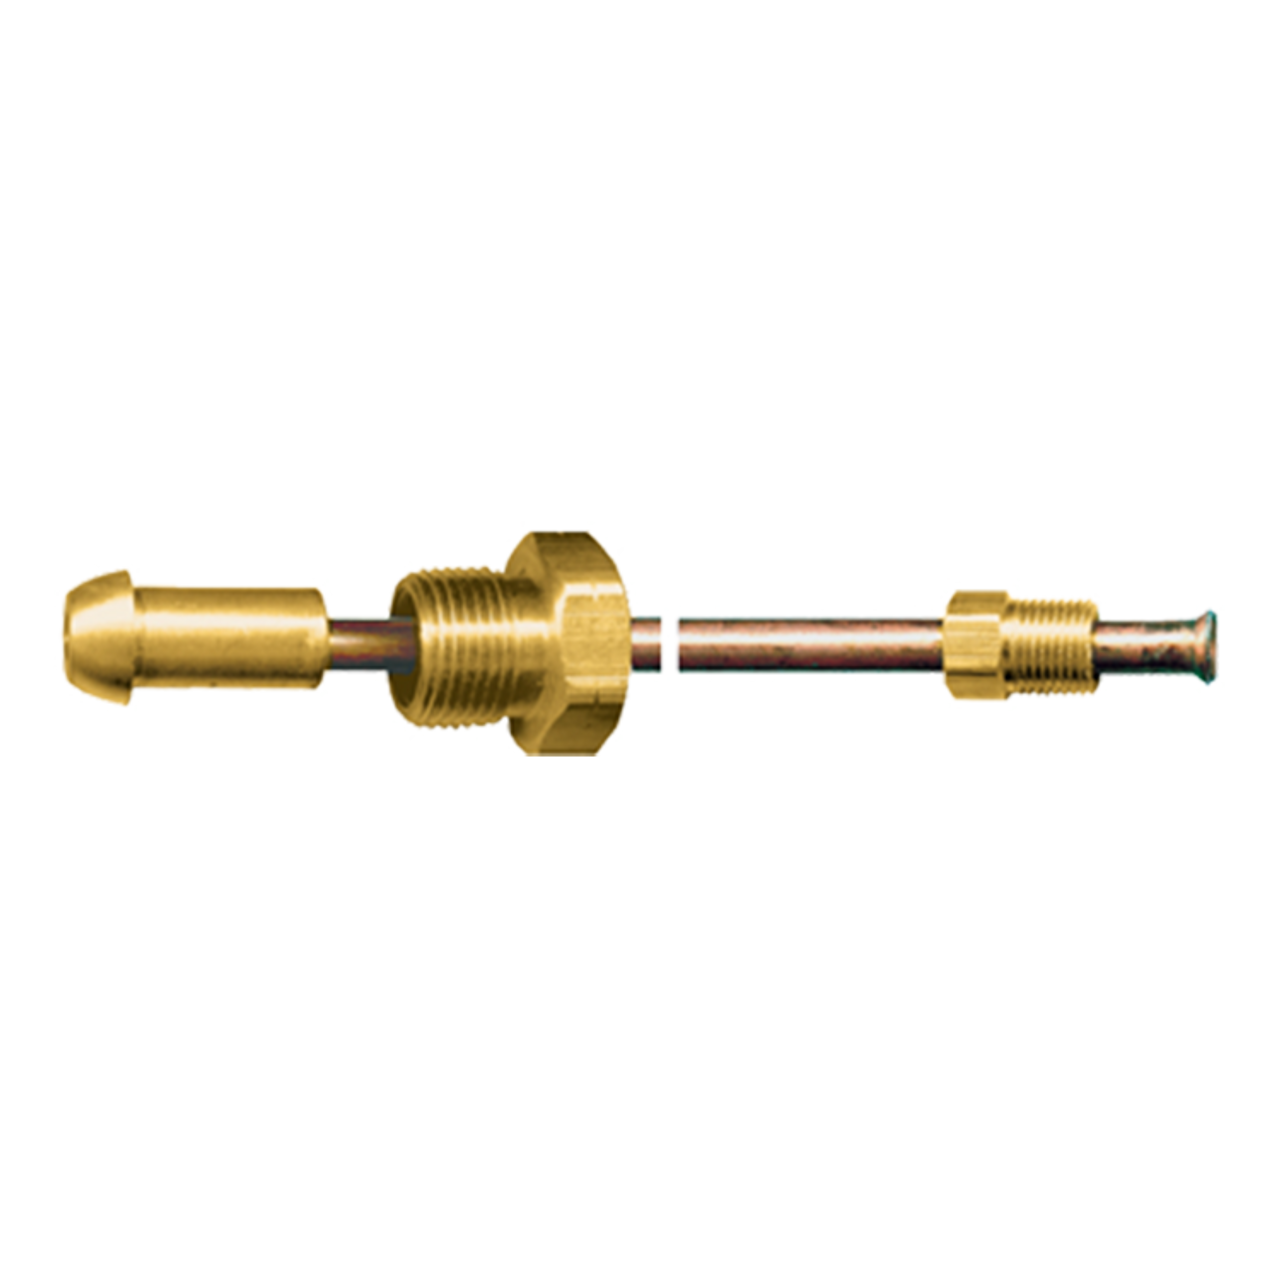 1/4 x 48" Copper Tube - Brass Male Long Nose POL (CGA510) - Male Inverted Flare Nut Pigtail  CP-2348